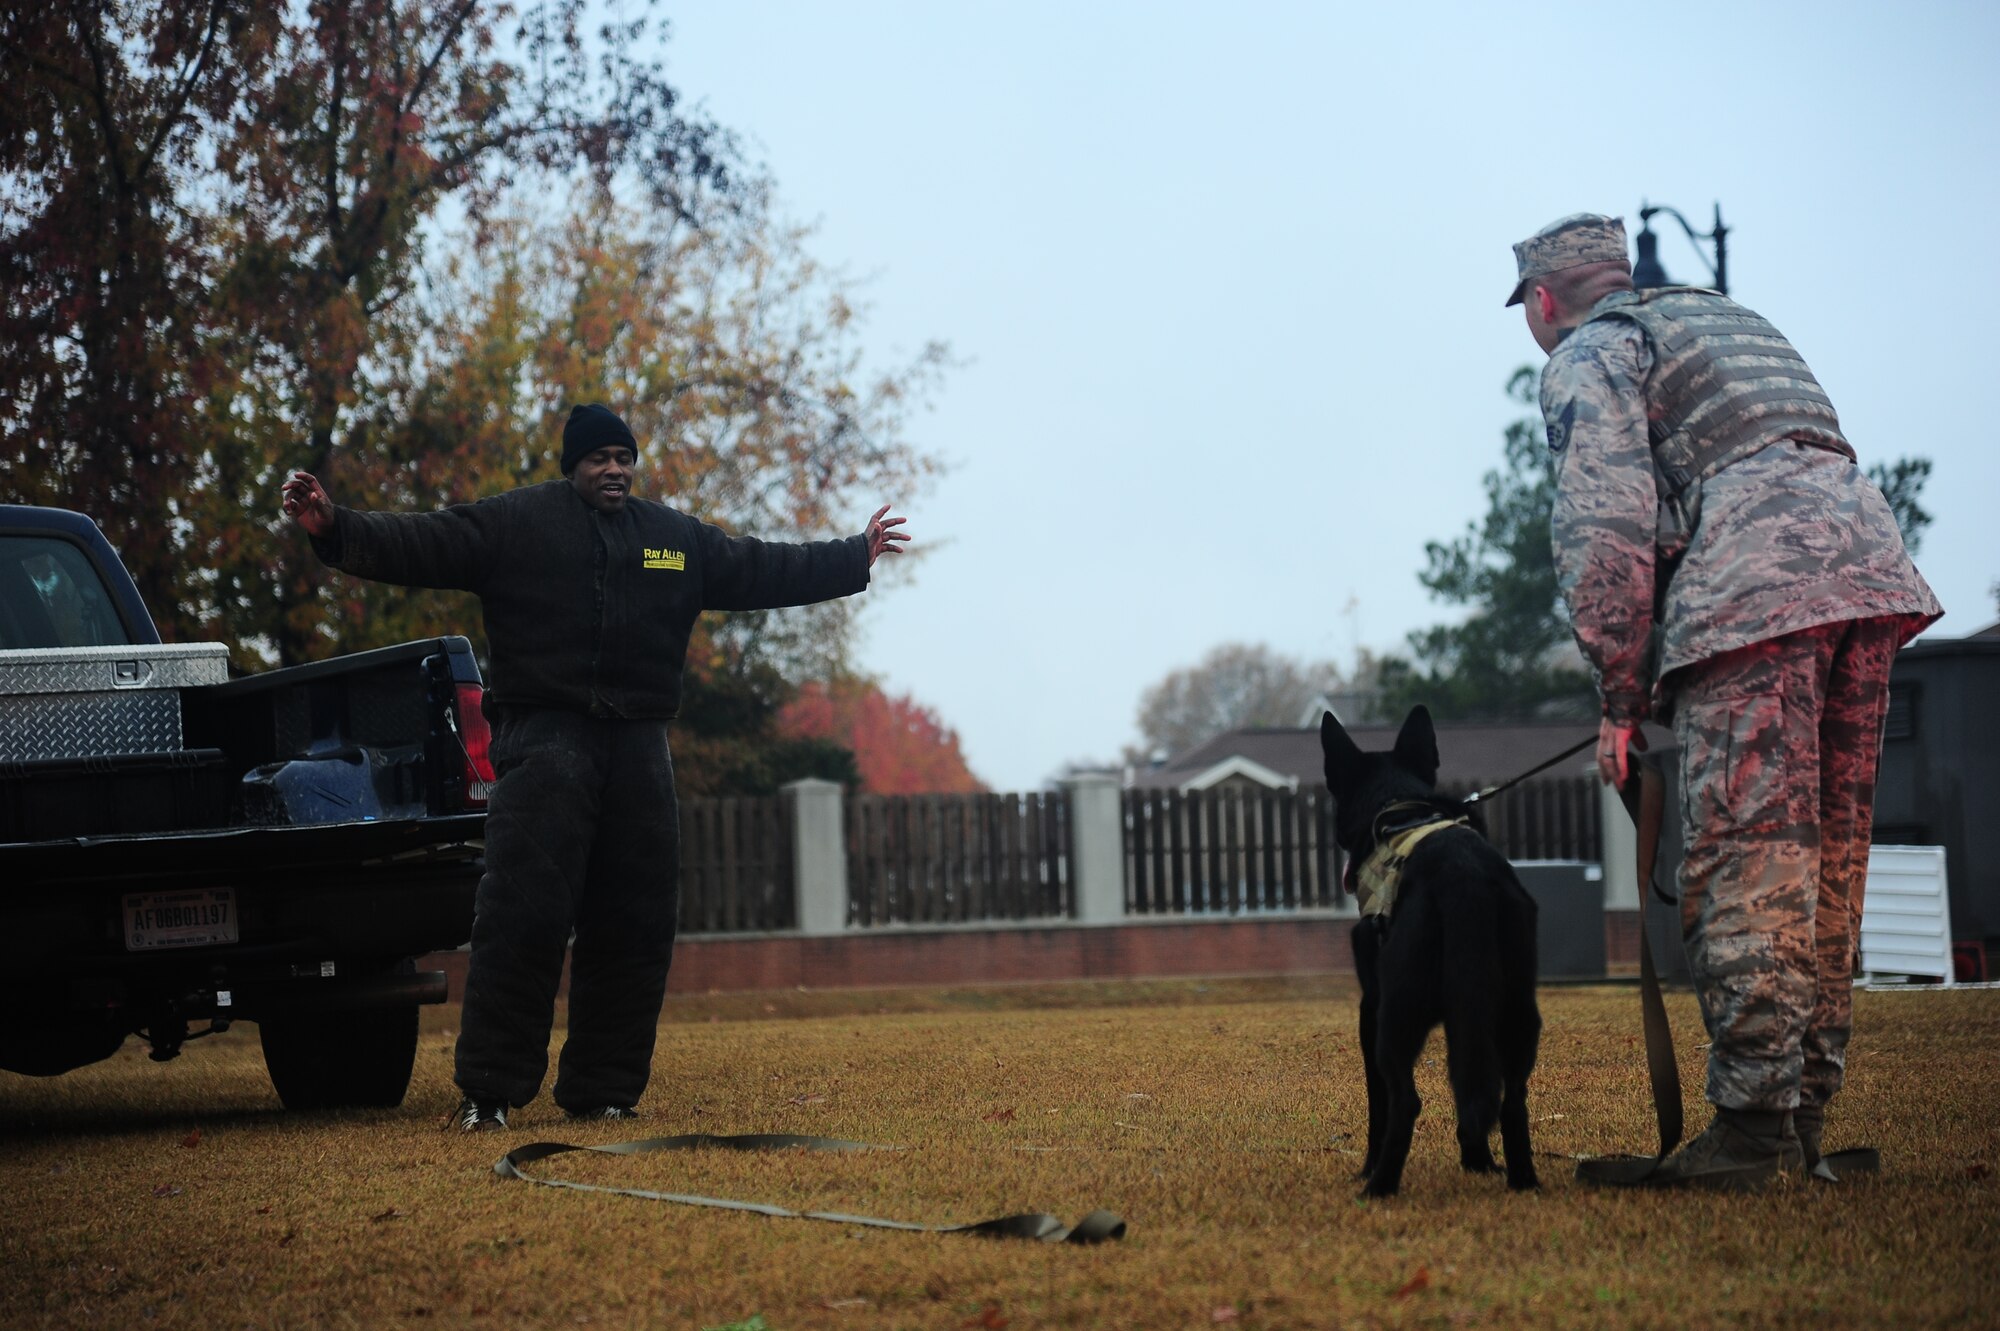 A Security Forces Airman taunts Maci, a military working dog, into attacking him at the Military Working Dog Demonstration Nov. 22 outside of the Columbus Club. (U.S. Air Force Photo/Airman 1st Class Daniel Lile)